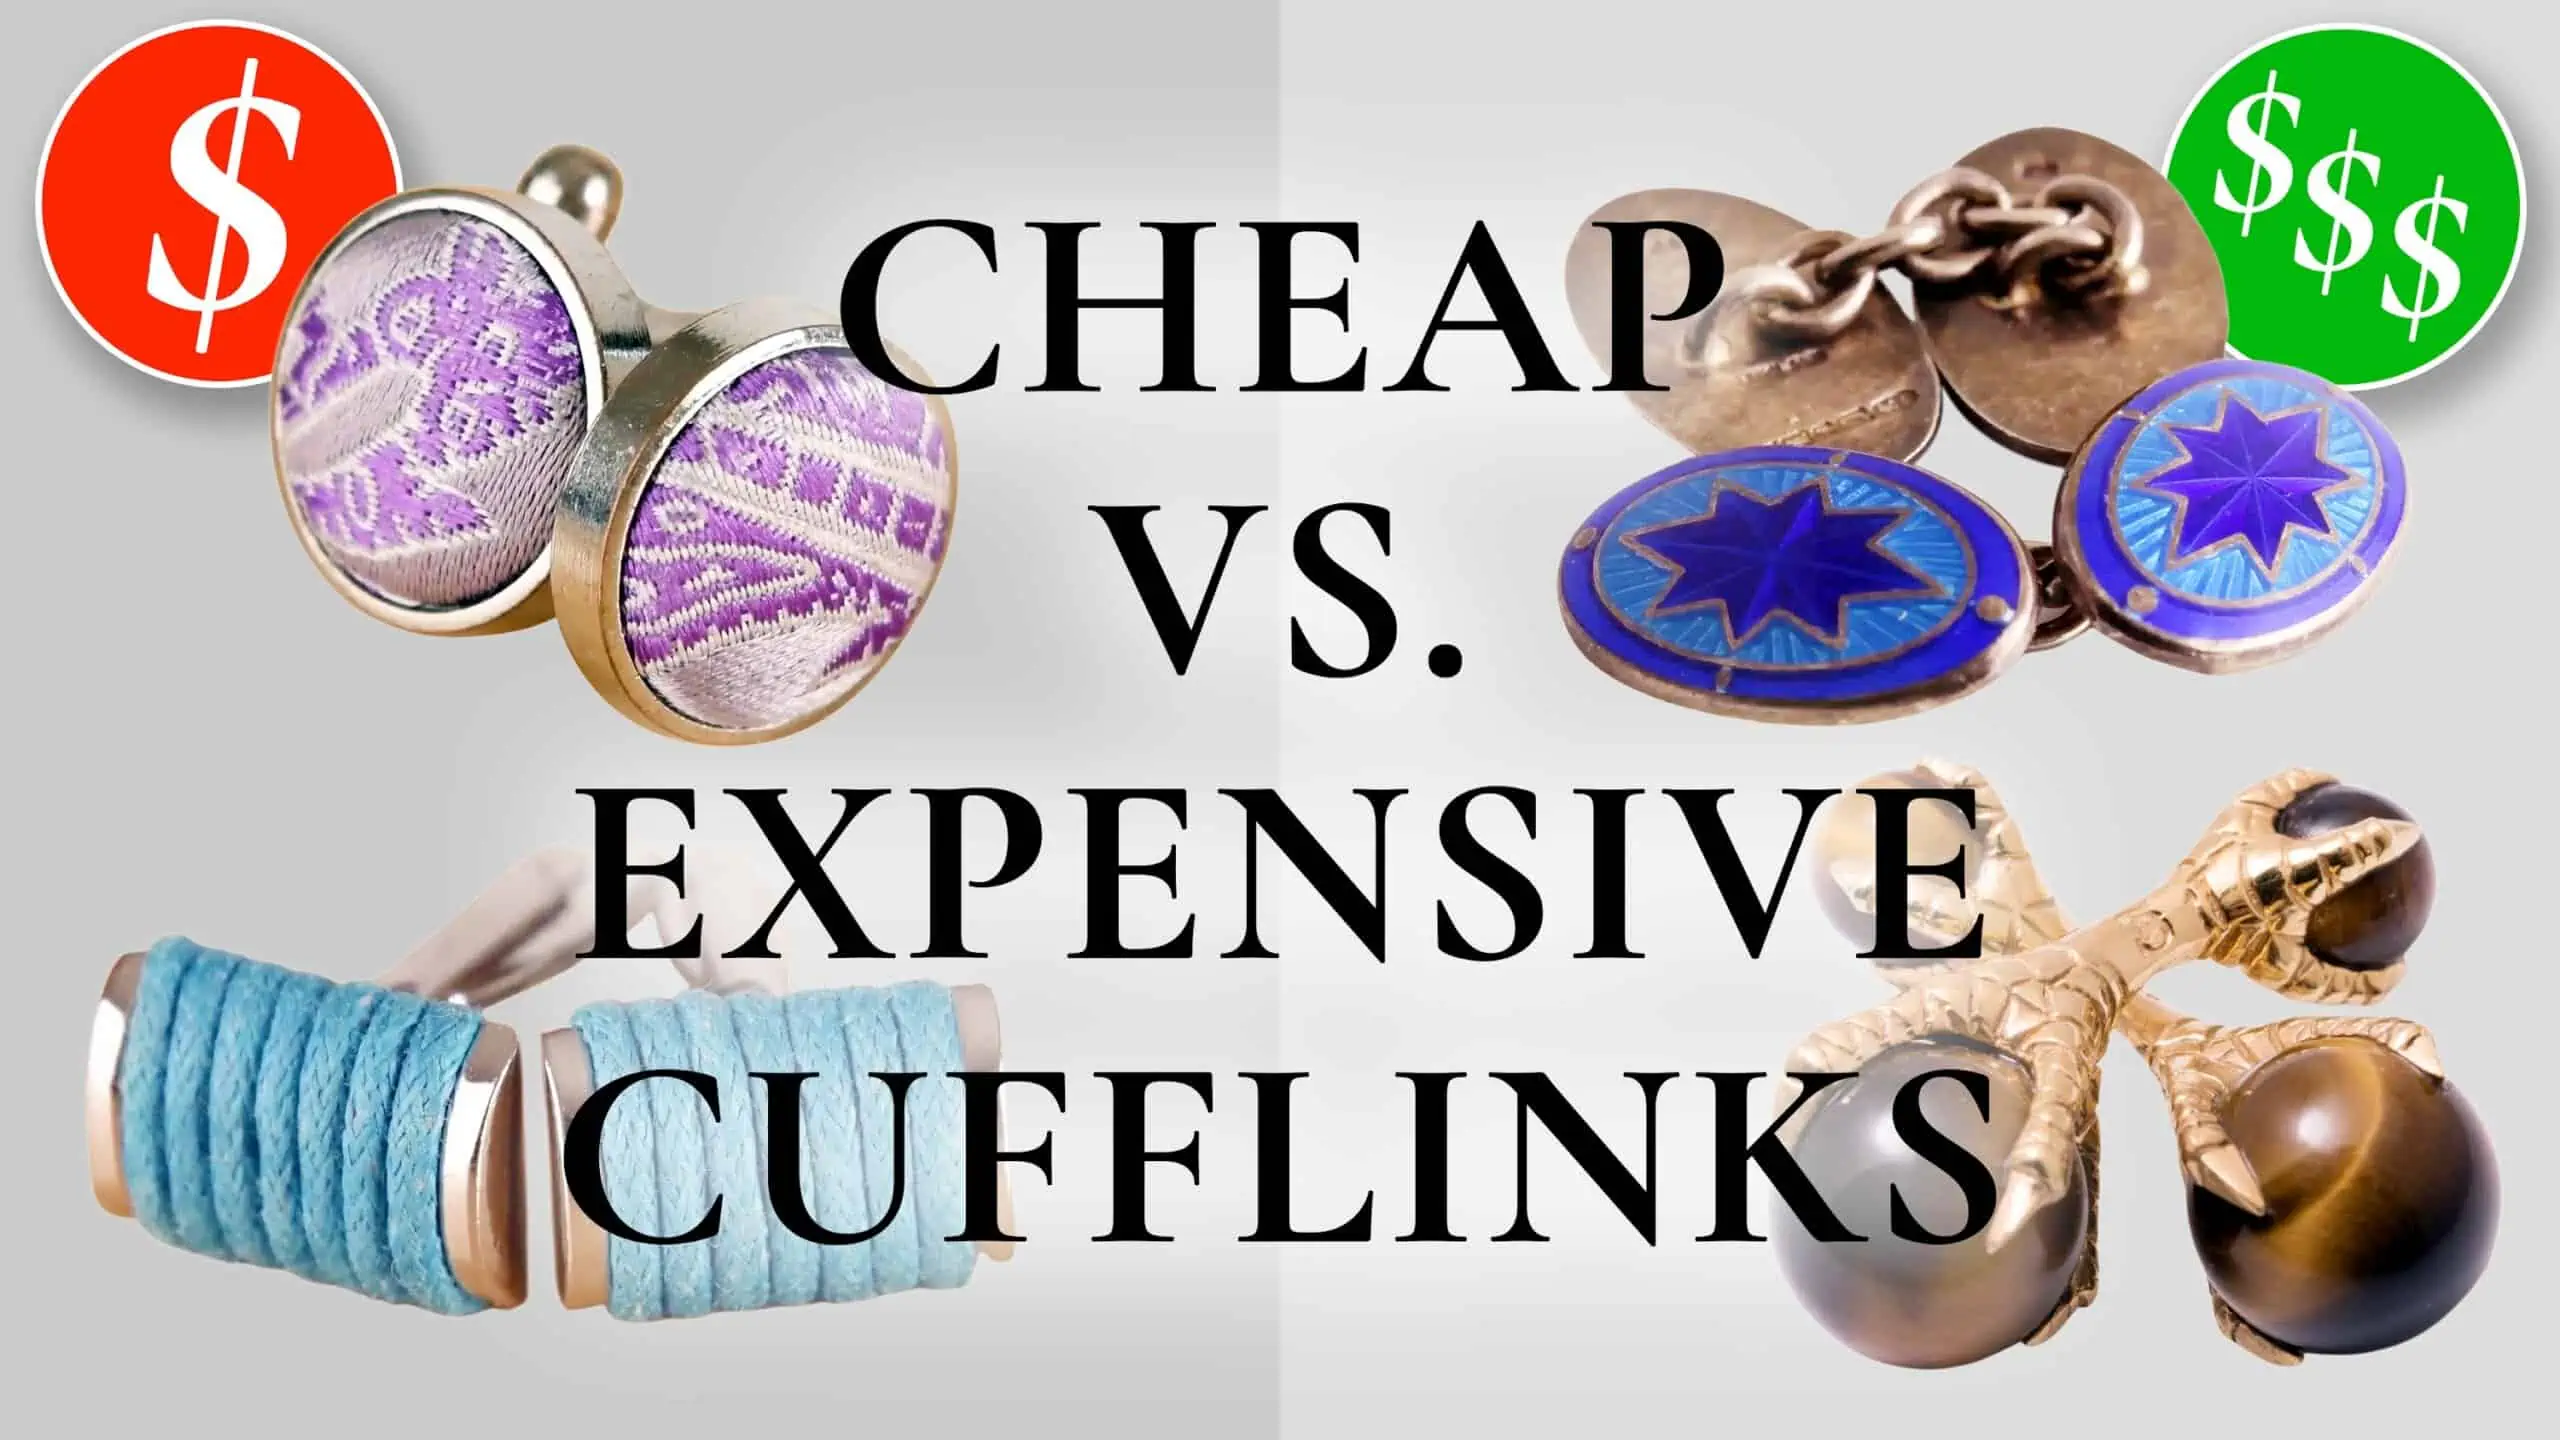 cheap vs expensive cufflinks 3840x2160 scaled